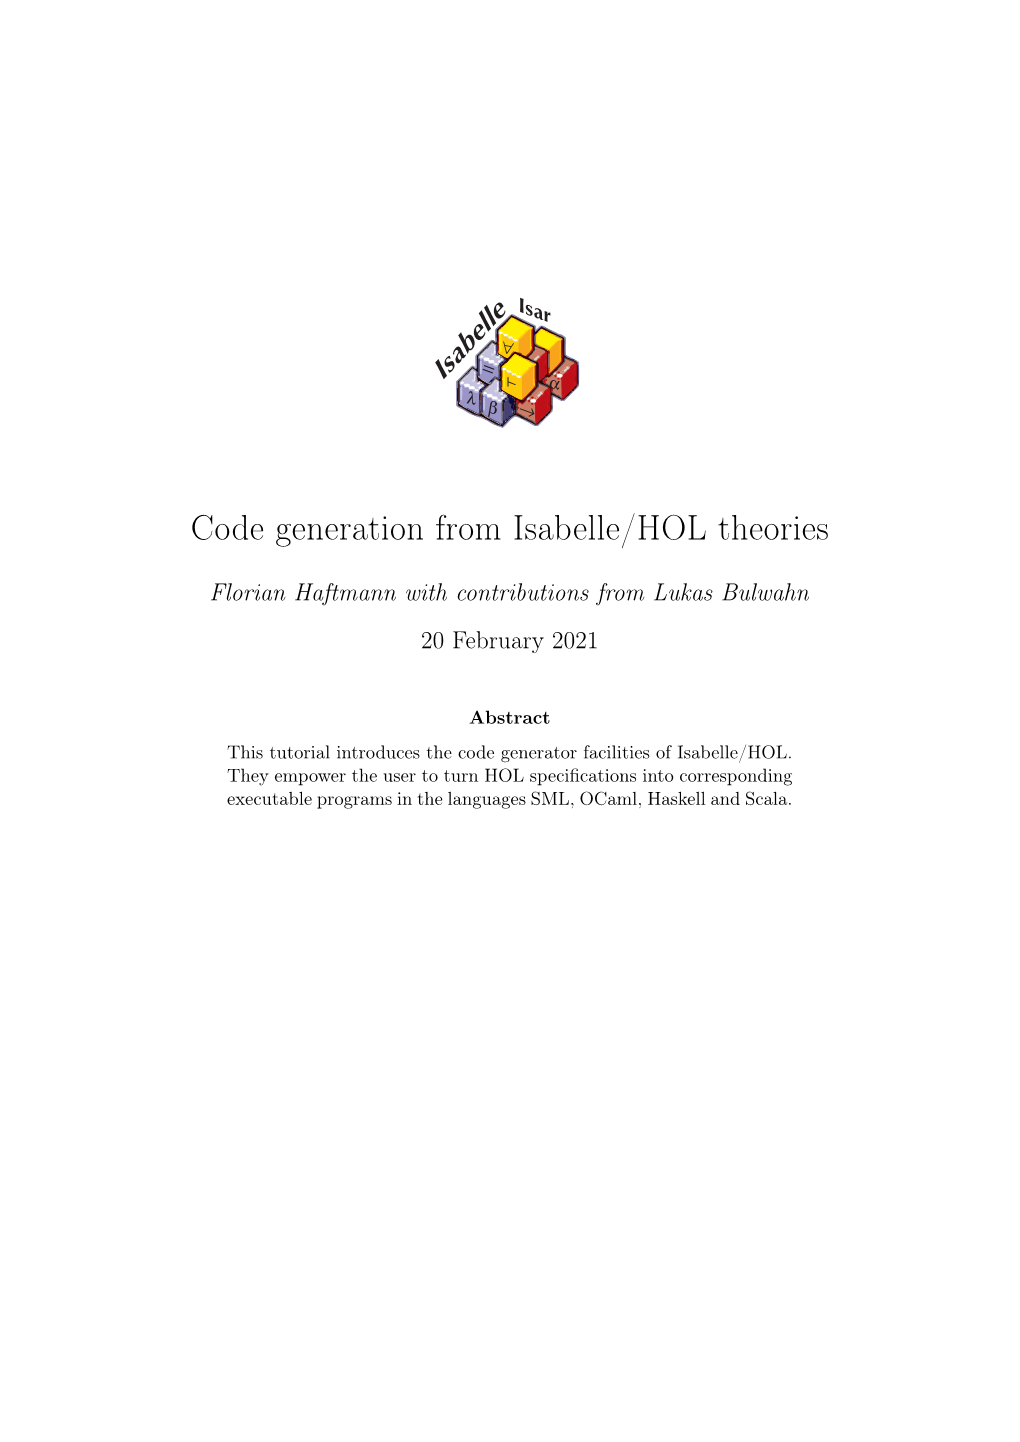 Code Generation from Isabelle/HOL Theories